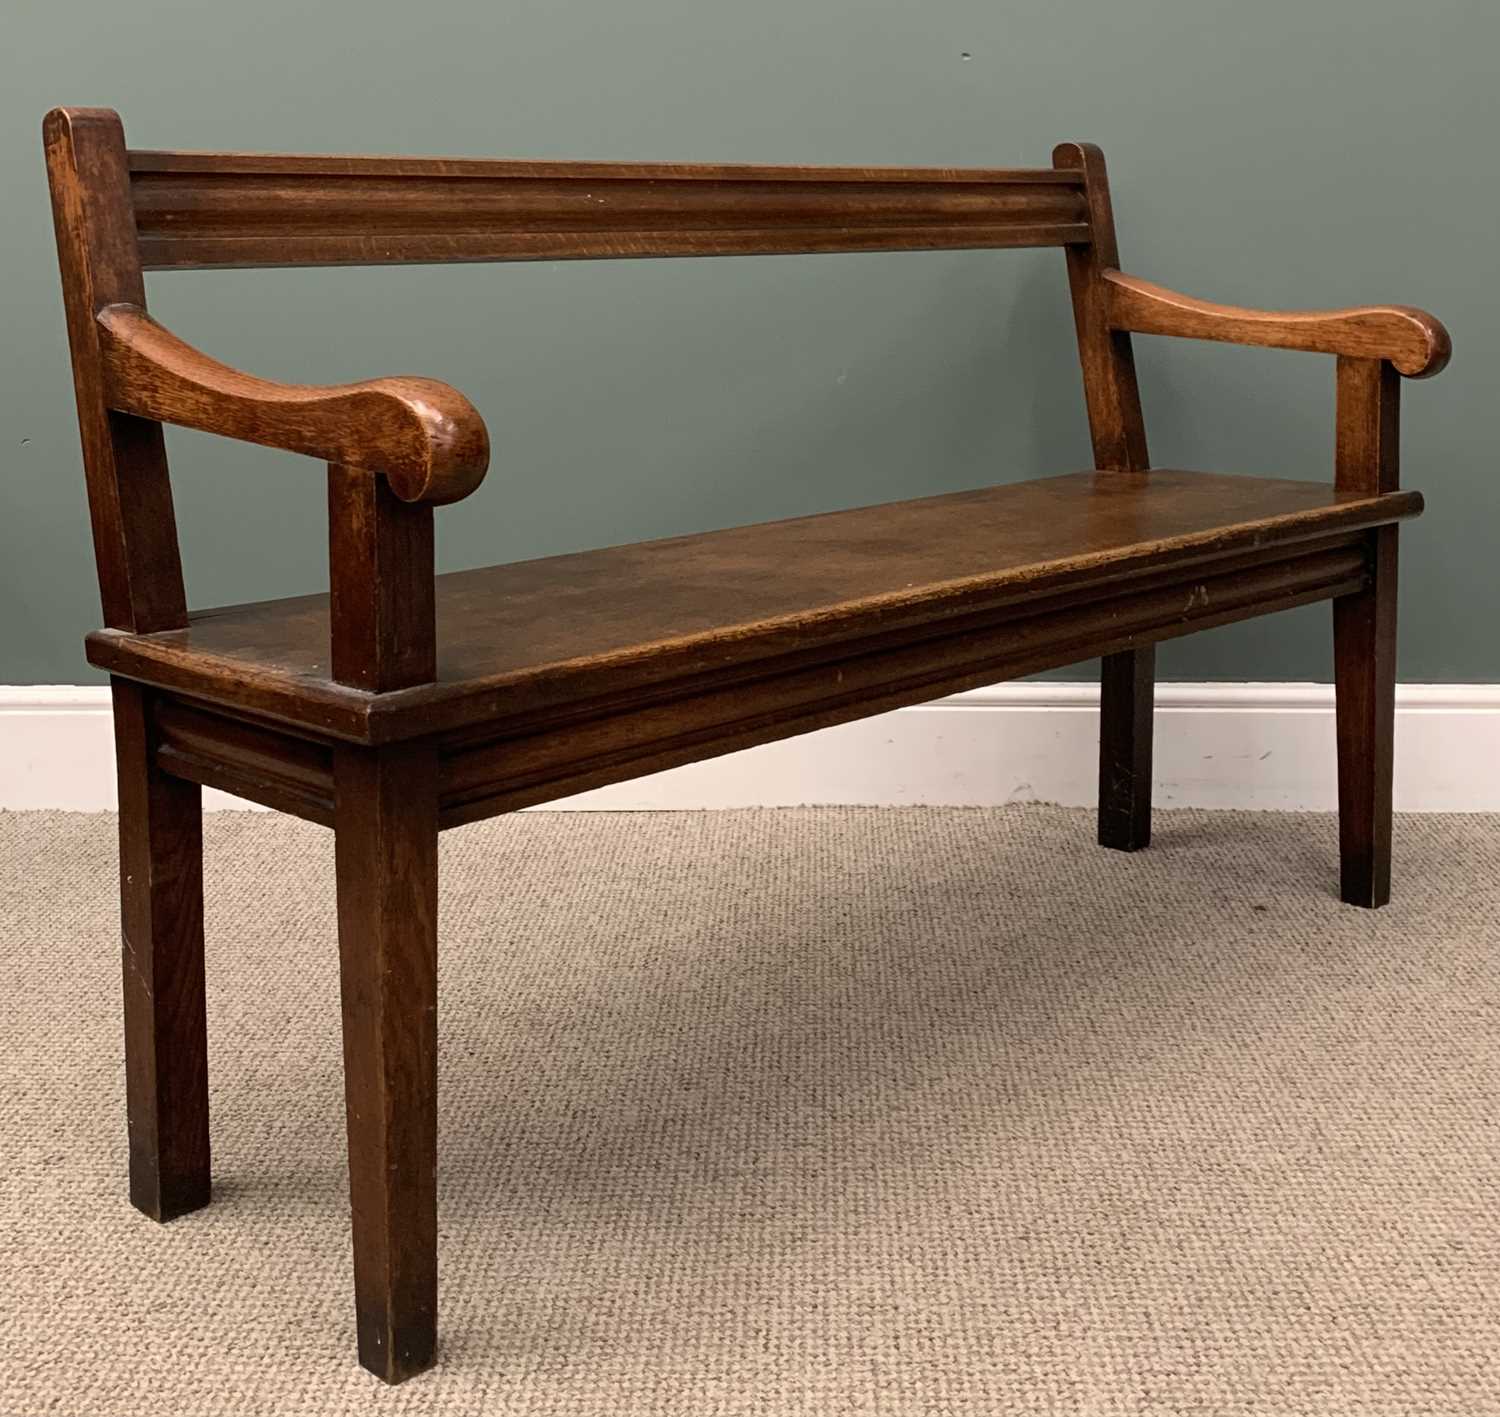 ANTIQUE OAK BENCH with scrolled arms and single rail back, 87 (h) x 141 (w) x 51 (d) cms Provenance: - Image 3 of 3